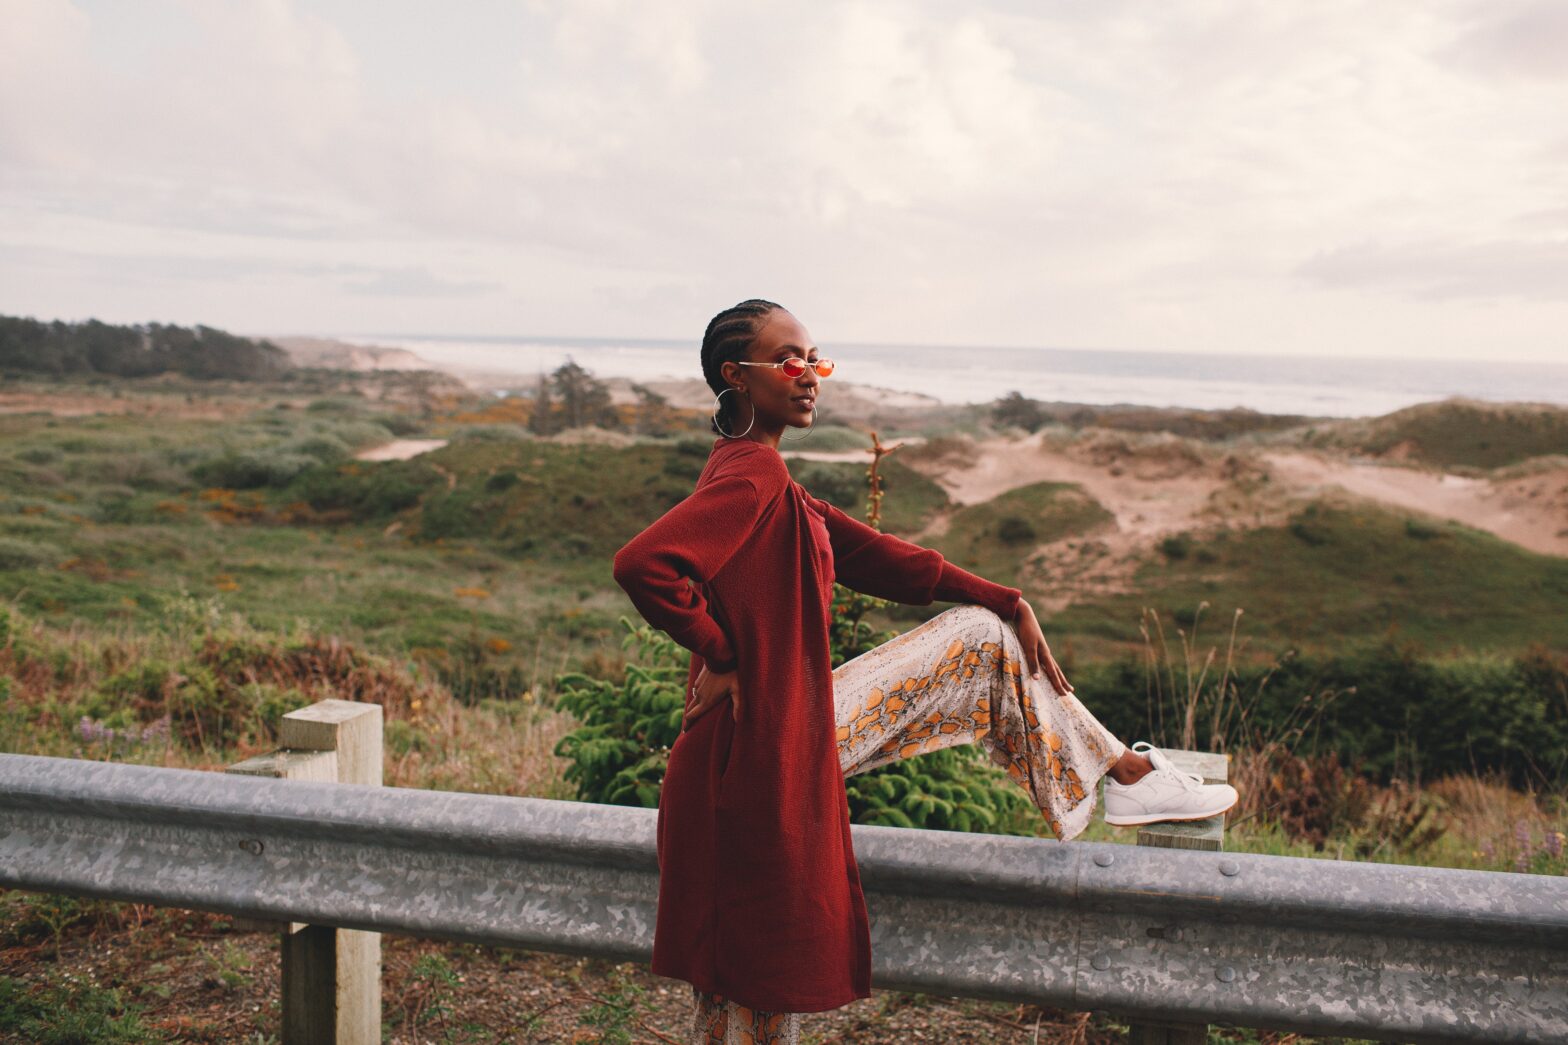 Black Women Reflect On How Solo Travel Taught Them To Enjoy Their Own Company